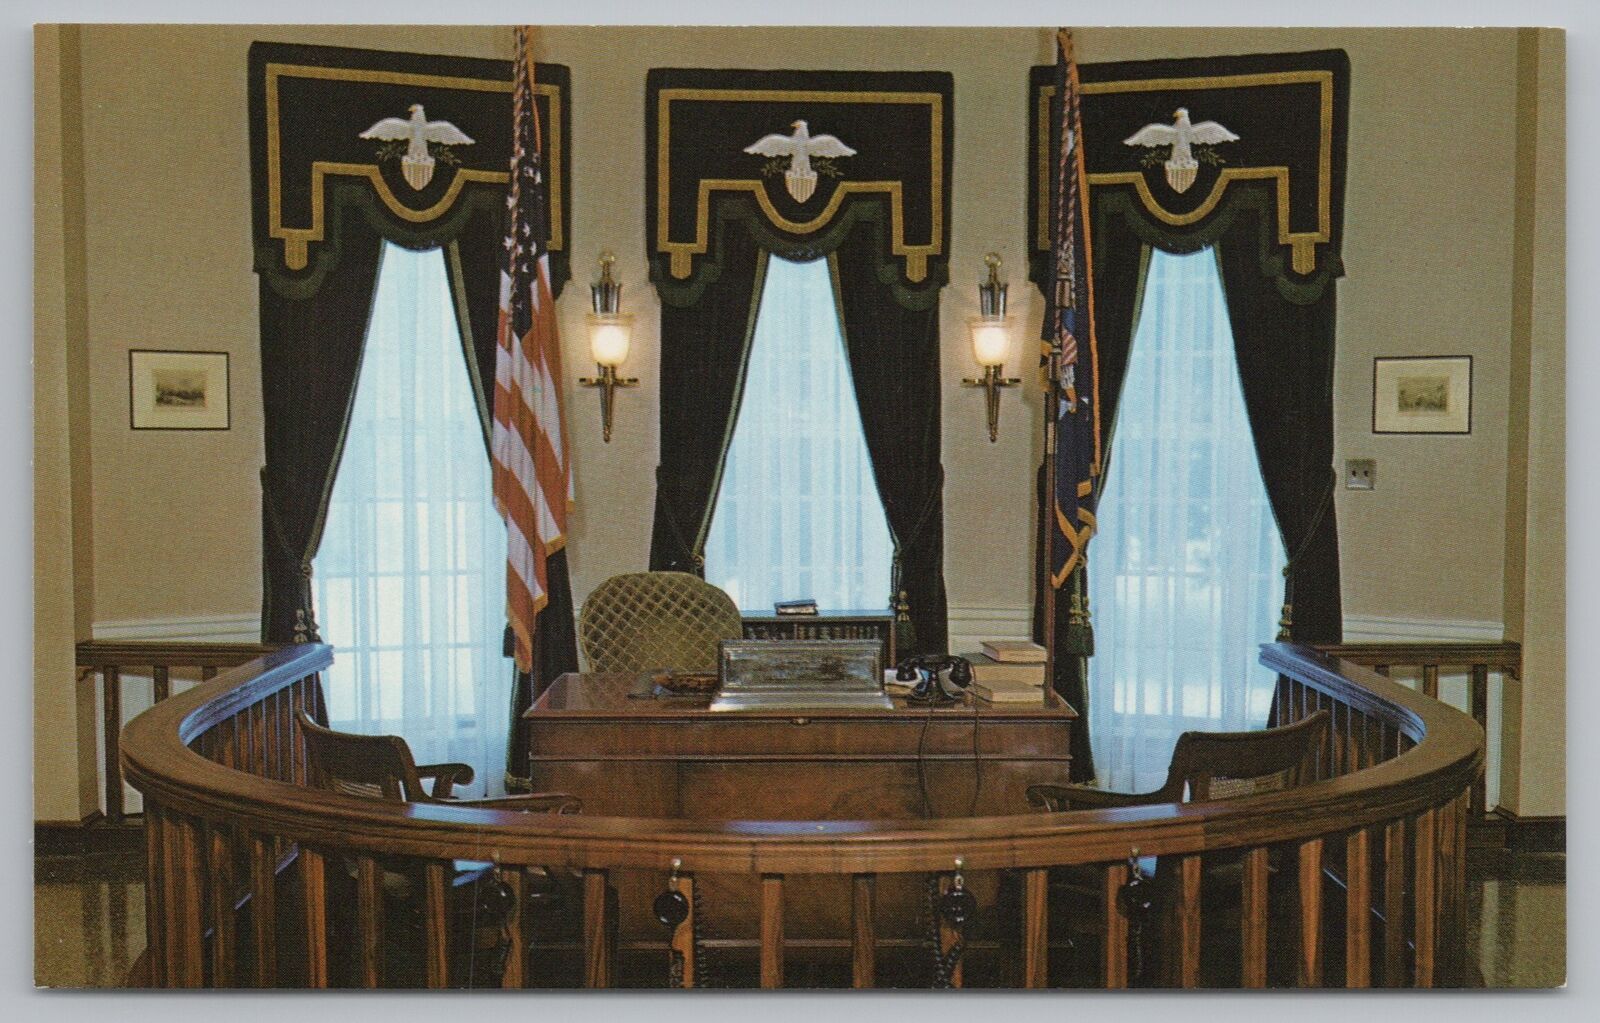 President~West Branch Iowa~Herbert Hoover Library Interior~Oval Office~1960s Pc